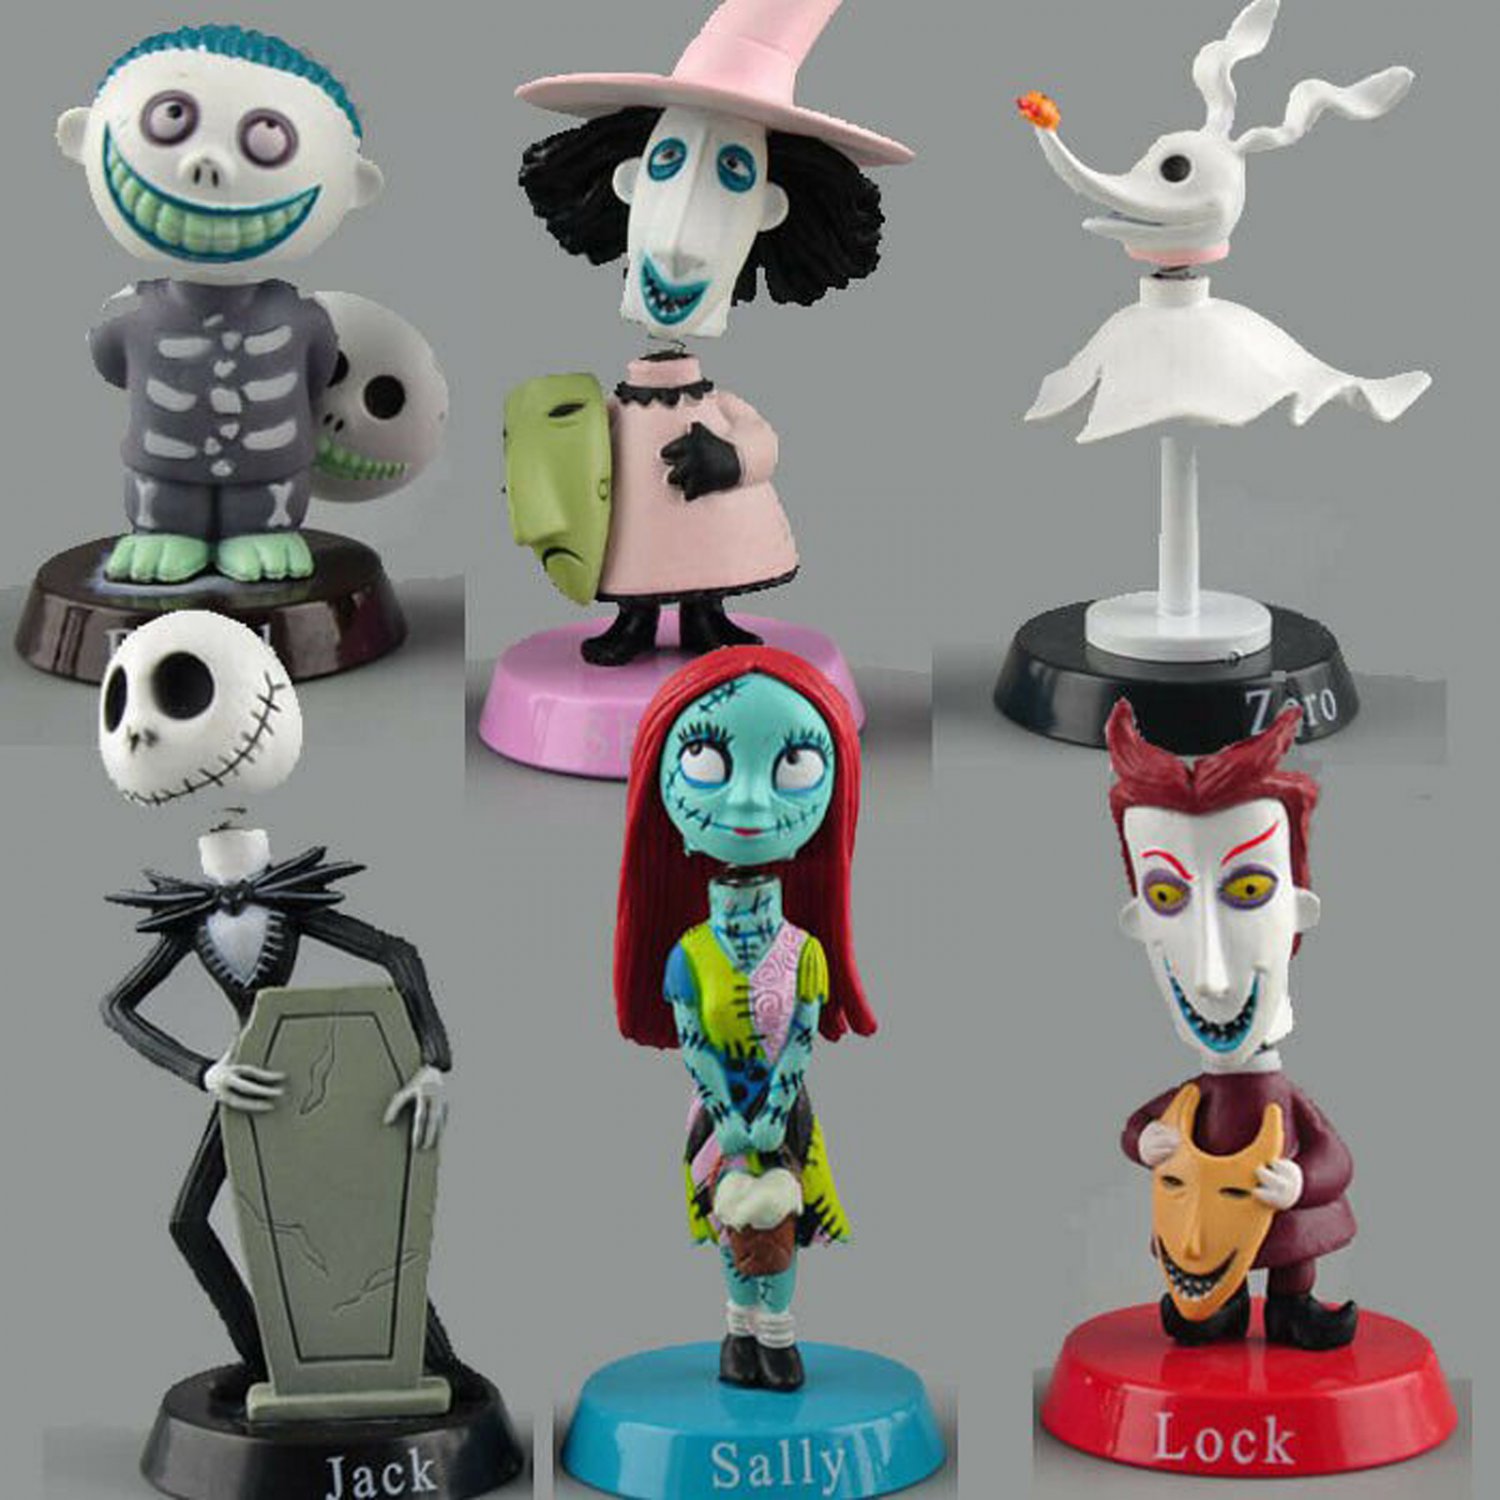 6pcs Collectible Nightmare Before Christmas PVC Action Figures Toy Gift Set